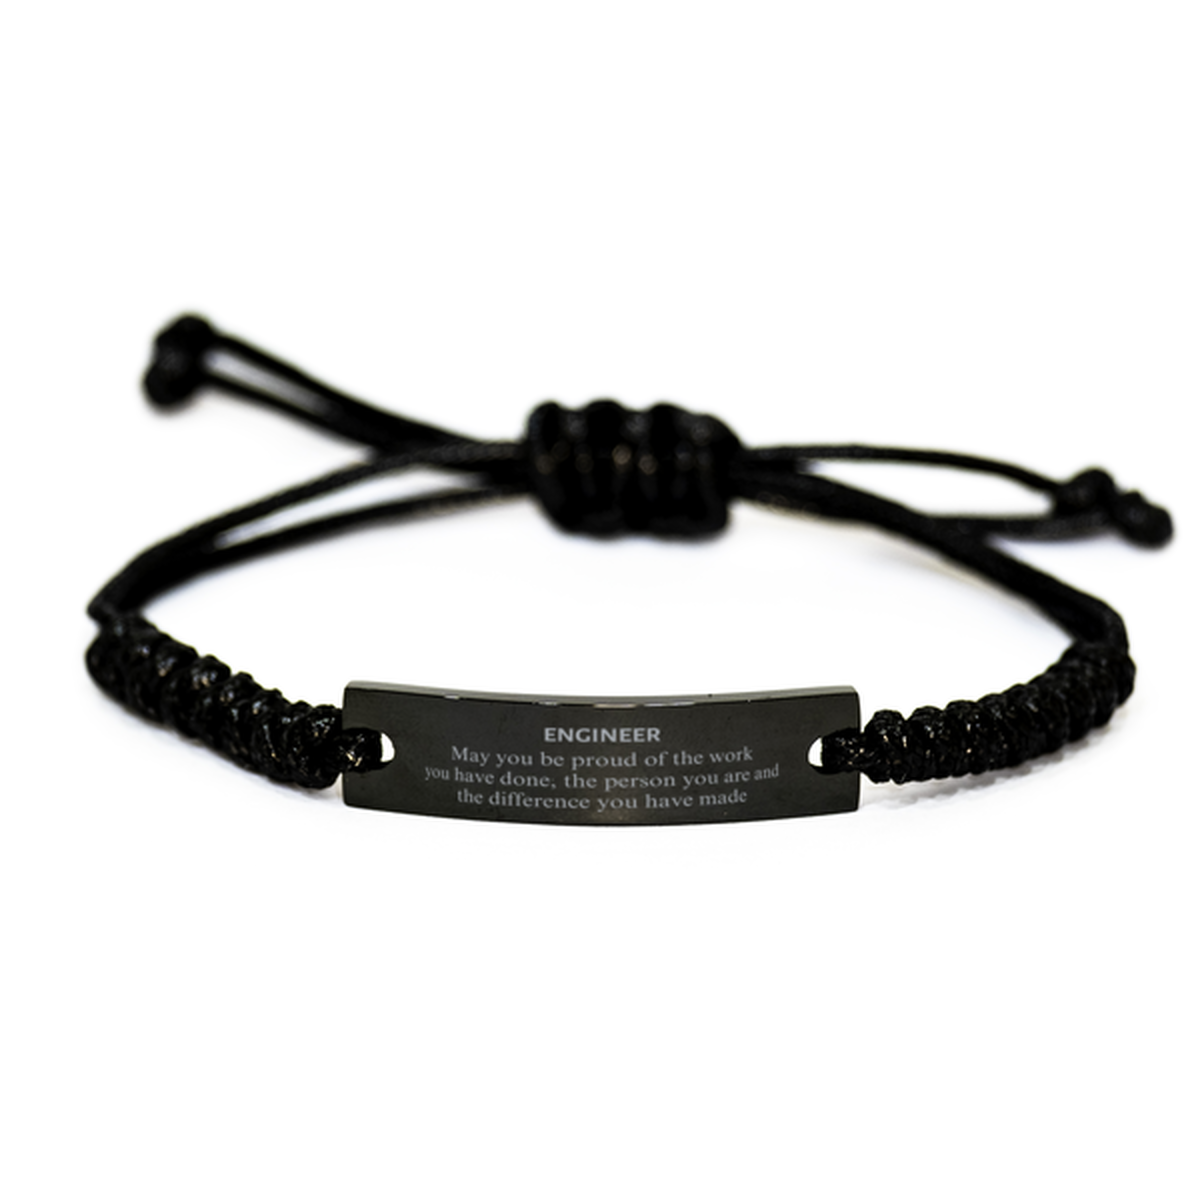 Engineer May you be proud of the work you have done, Retirement Engineer Black Rope Bracelet for Colleague Appreciation Gifts Amazing for Engineer